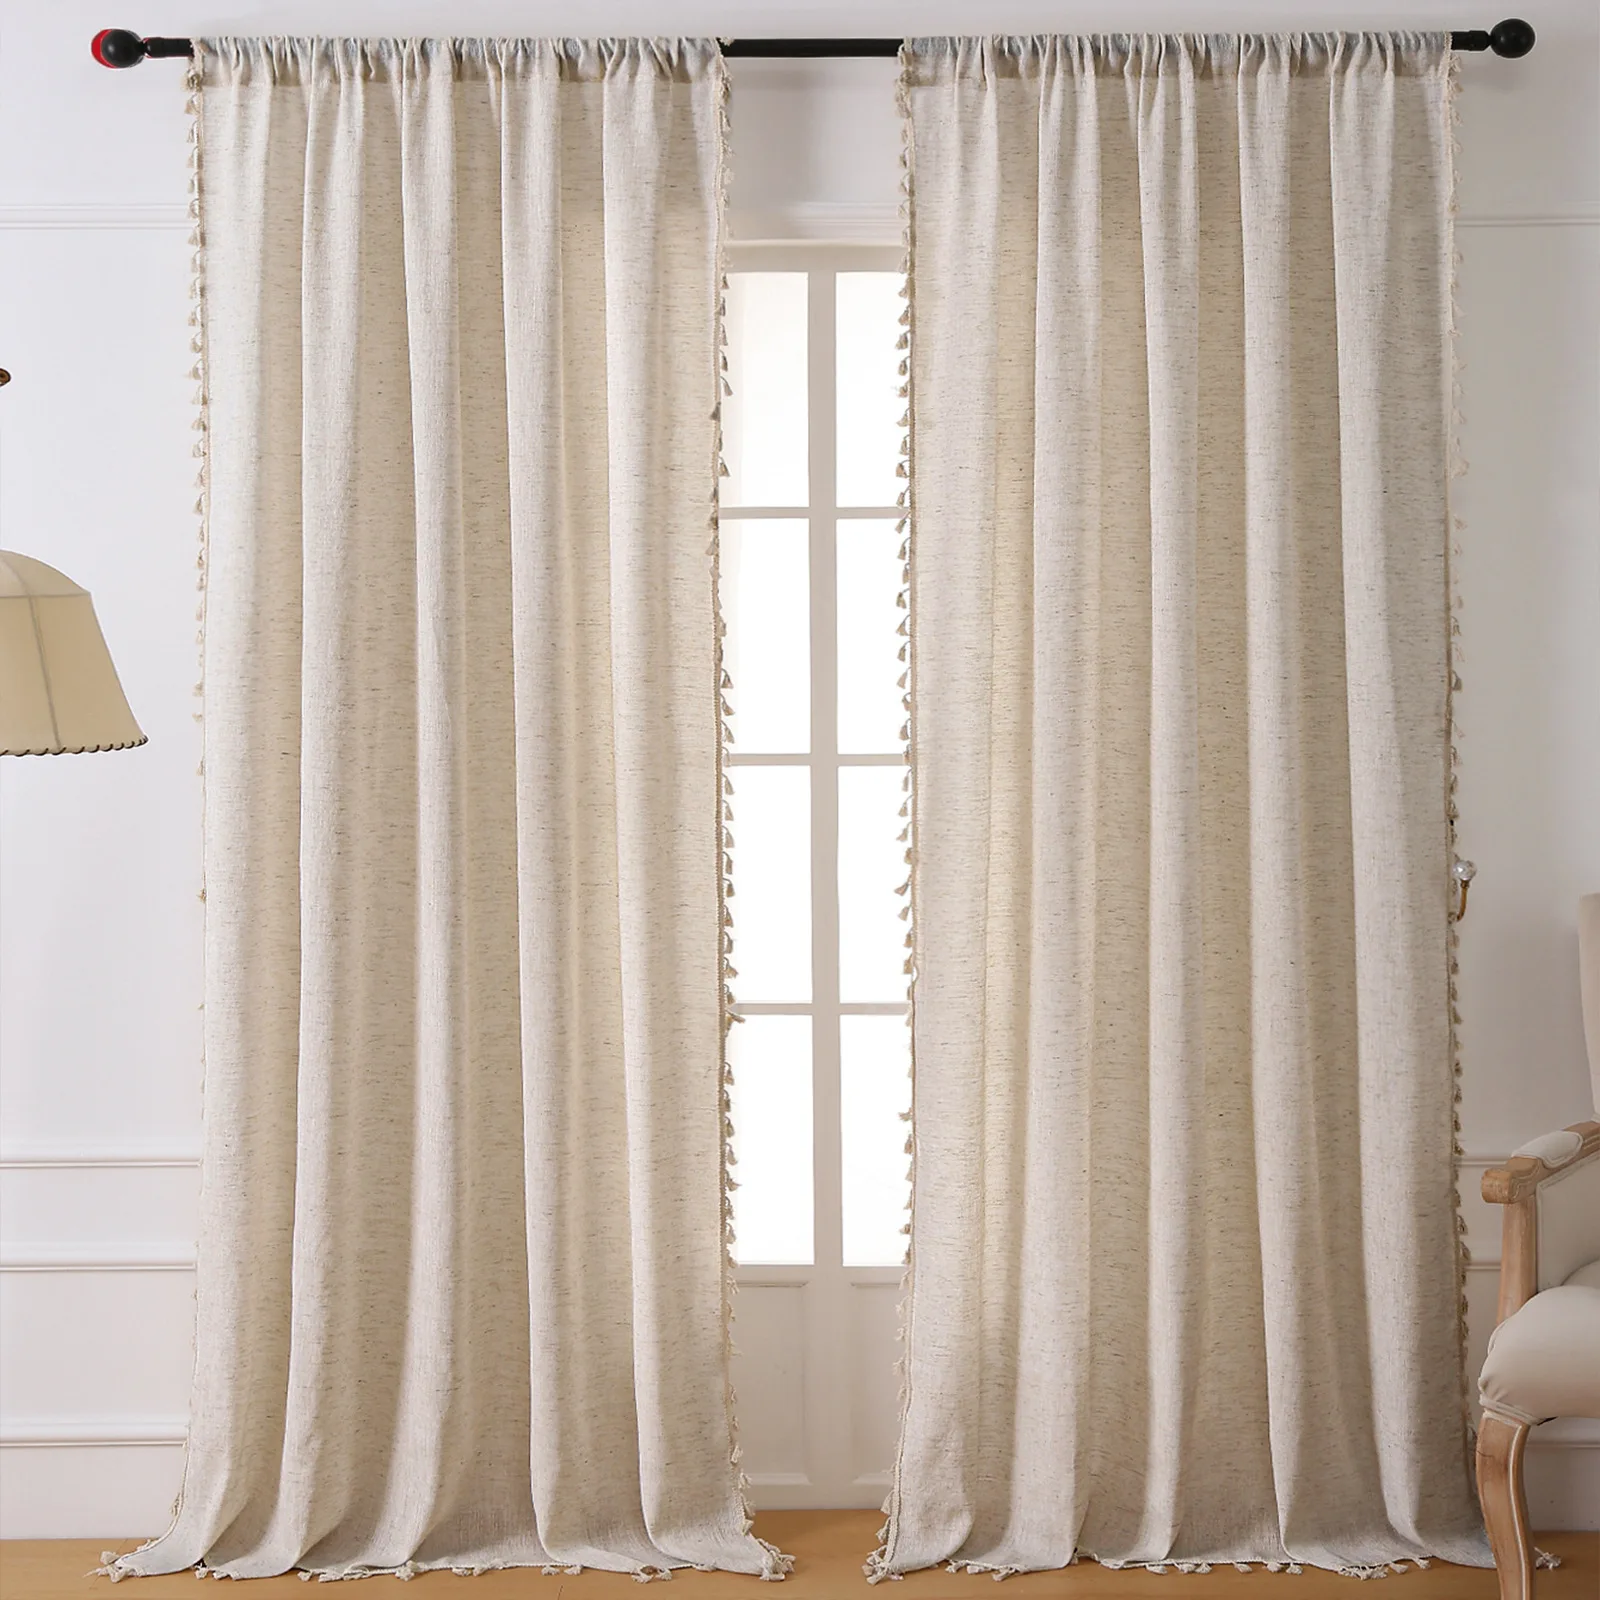 Solid Cotton Linen Tassel Window Curtain Semi-shading Vintage Drapes for Living Room Bedroom Kitchen Door Drapes Home Decoration